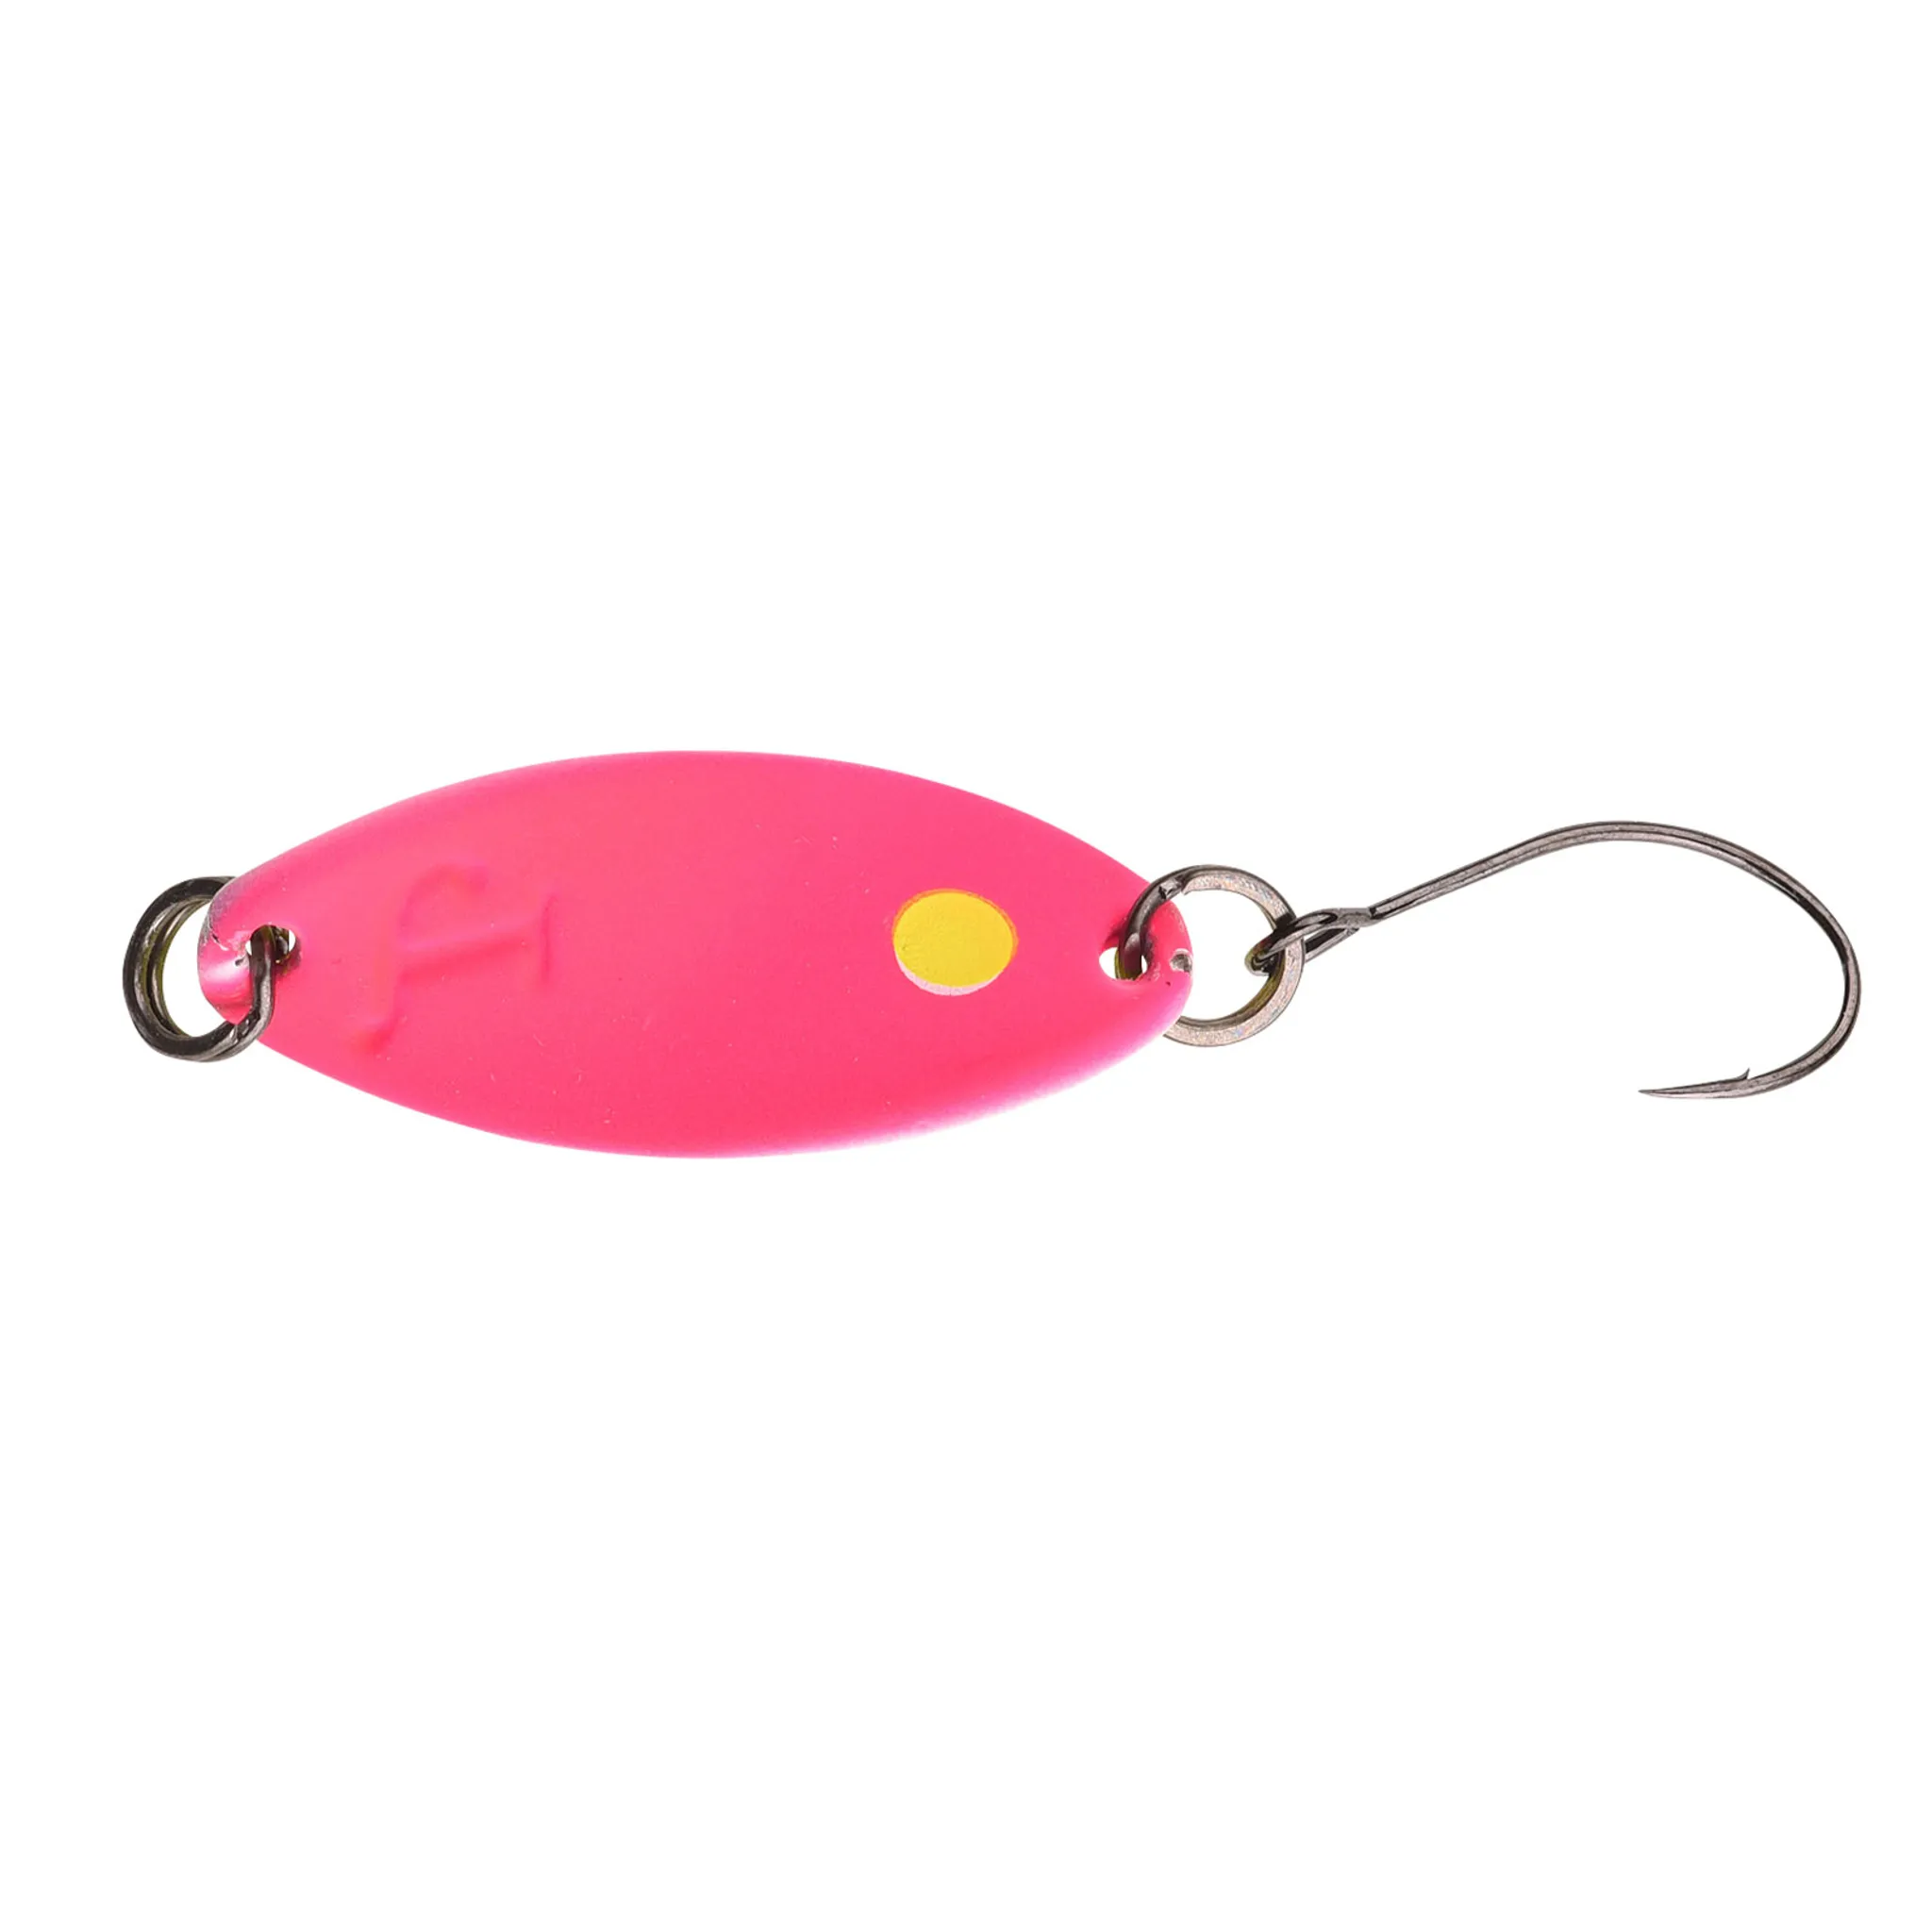 Spro Trout Master Incy Spoon Pink/Yellow 3,5g